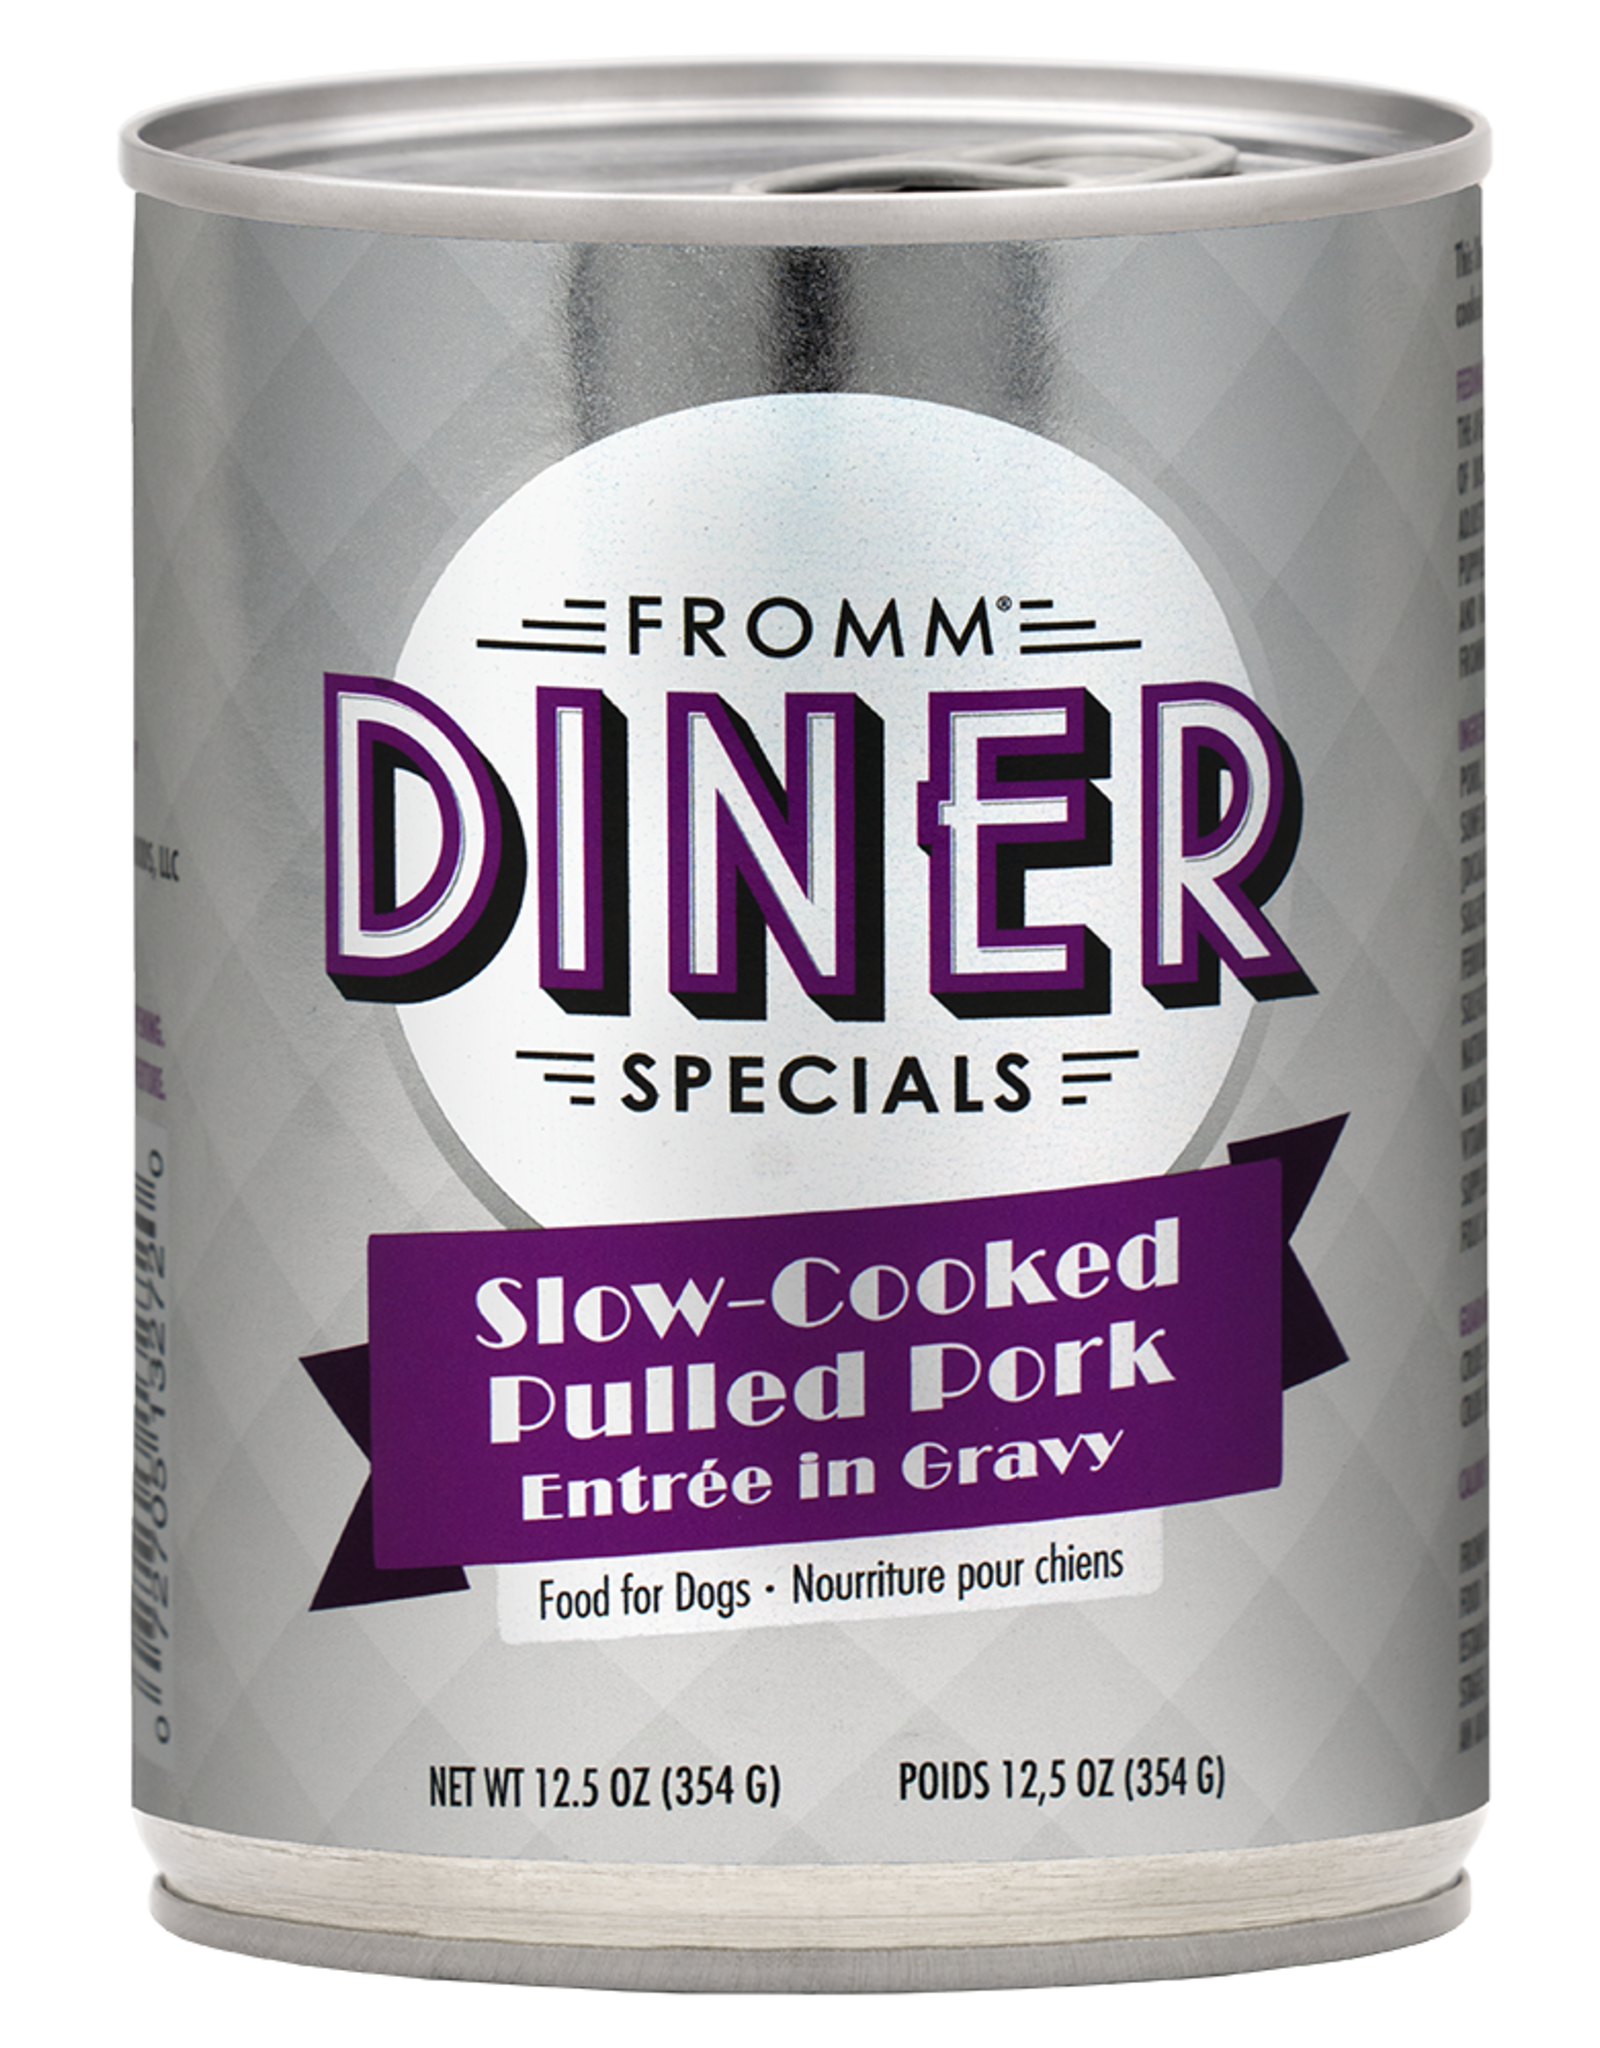 FROMM FROMM DINER 12.5 OZ